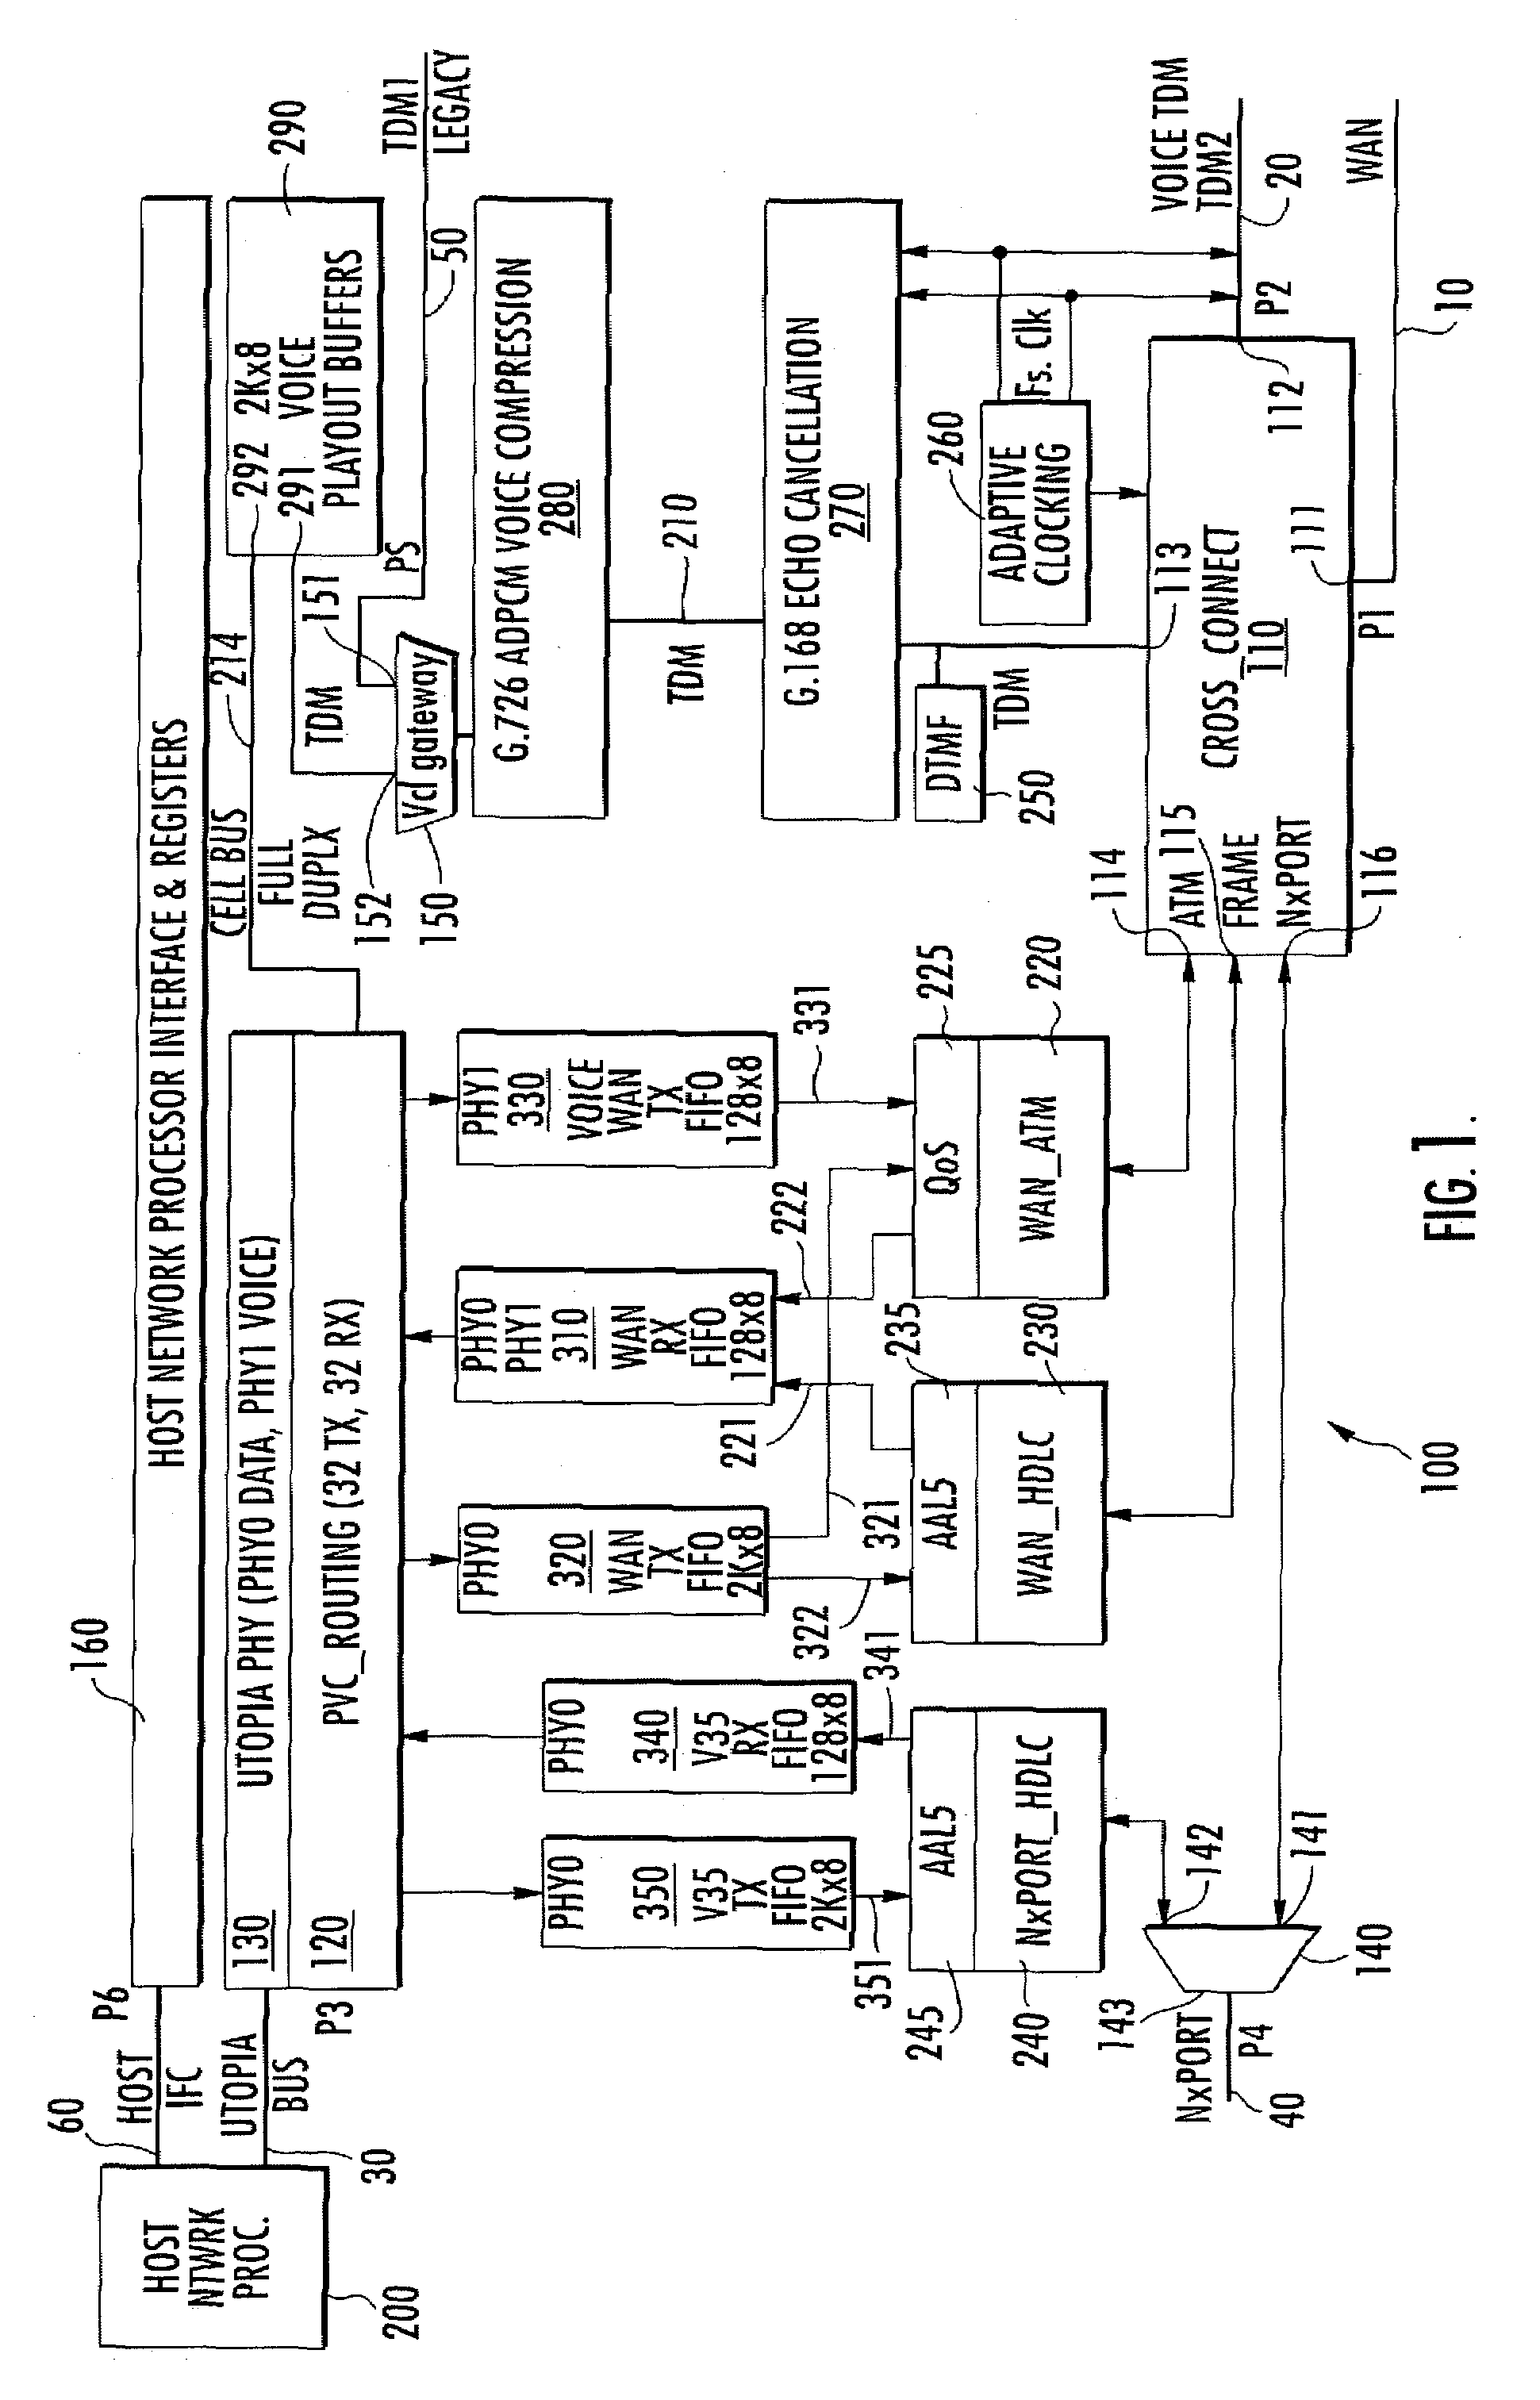 Dual-PHY based integrated access device